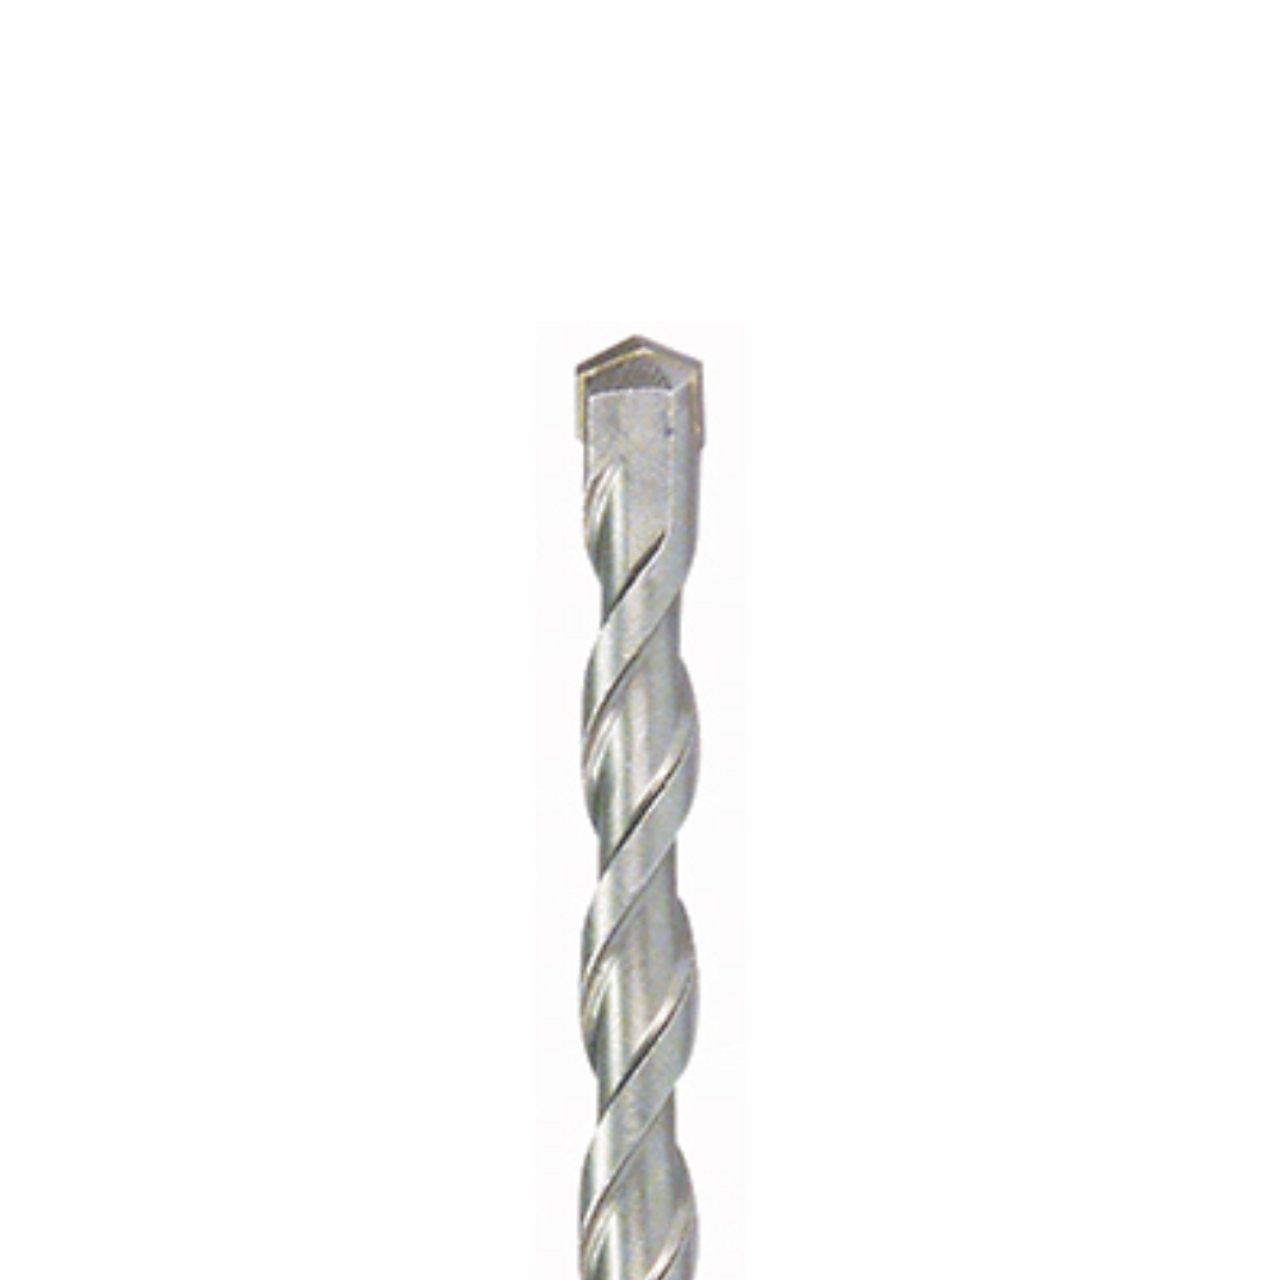 BOHRCRAFT Drill Bits | 2590 ECO Hammer Drill Bits for 5500mm Depth for SDS-Plus